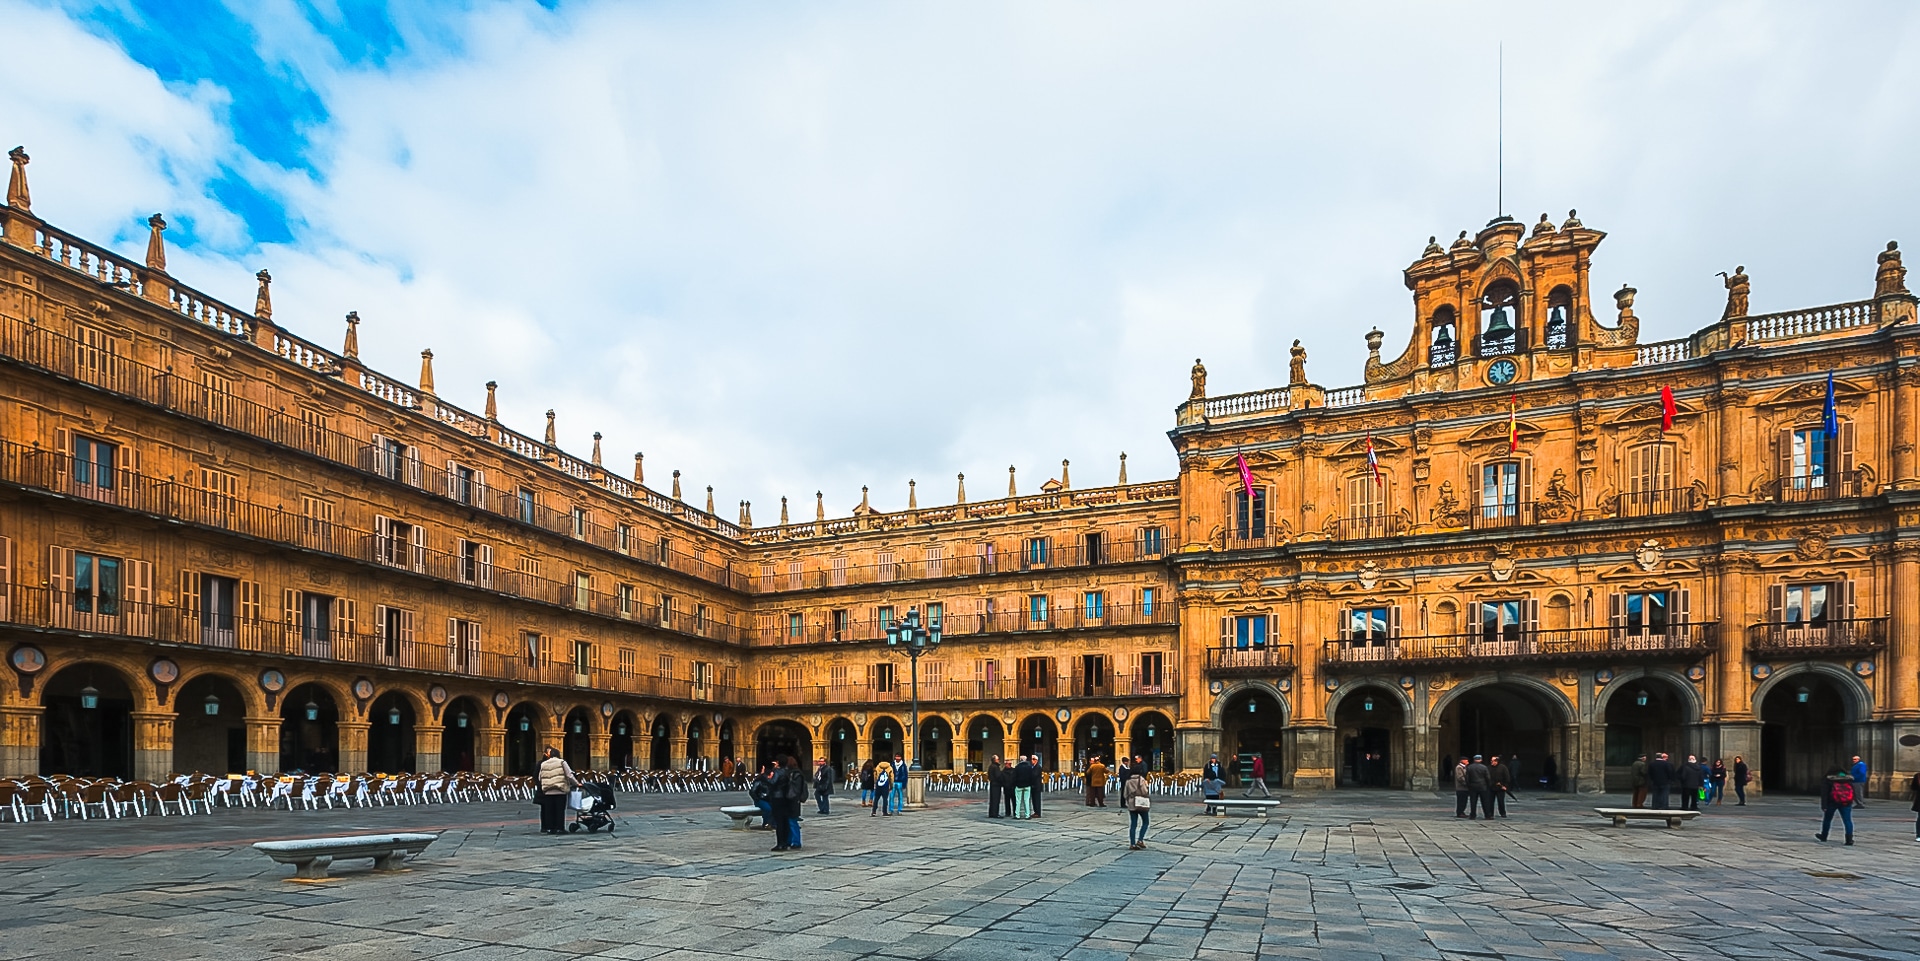 Excursions and tours in Salamanca, Spain